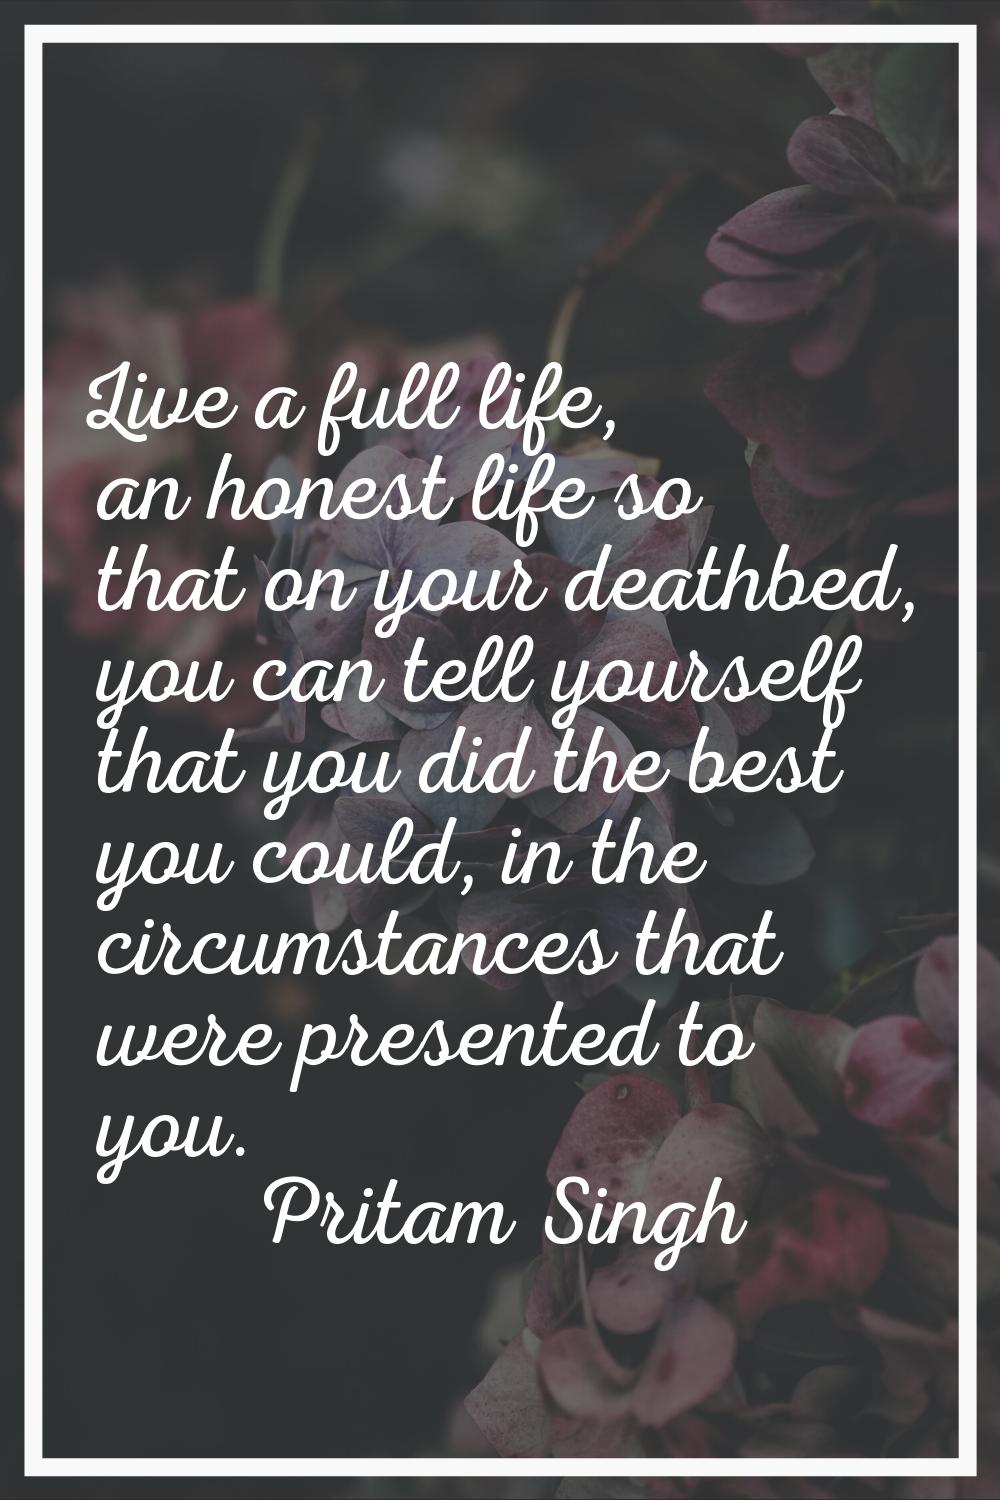 Live a full life, an honest life so that on your deathbed, you can tell yourself that you did the b